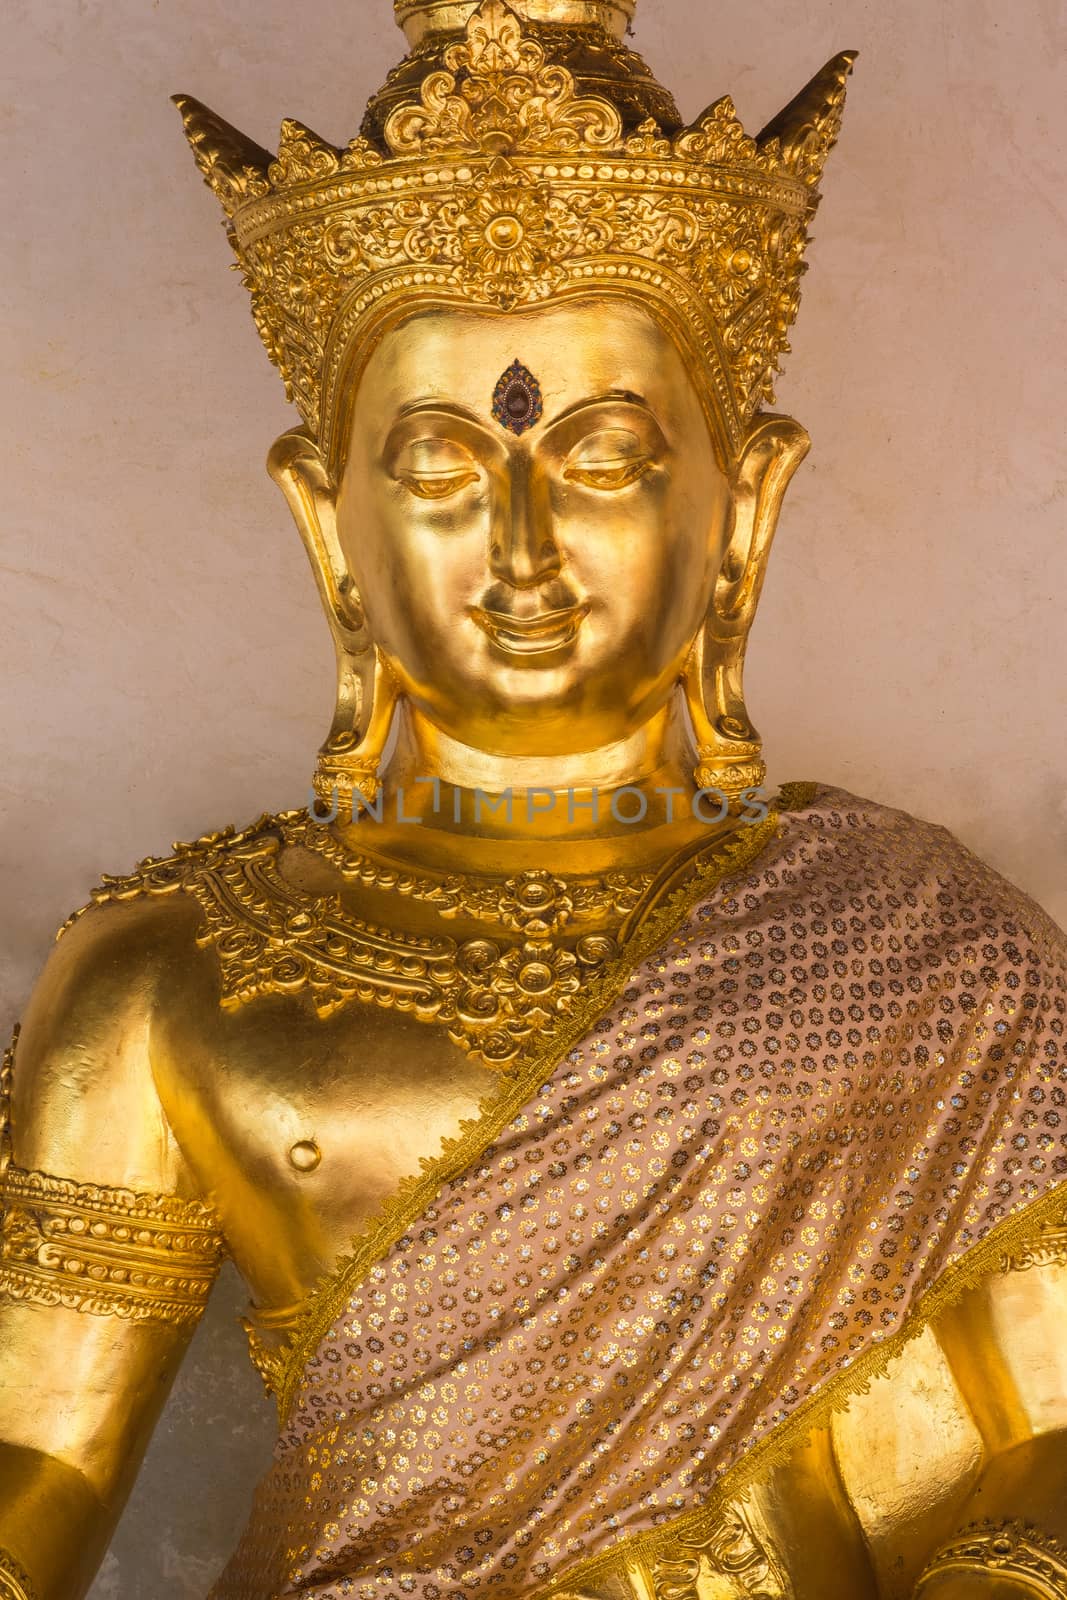 A golden buddha statue at the temple in Northern Thailand